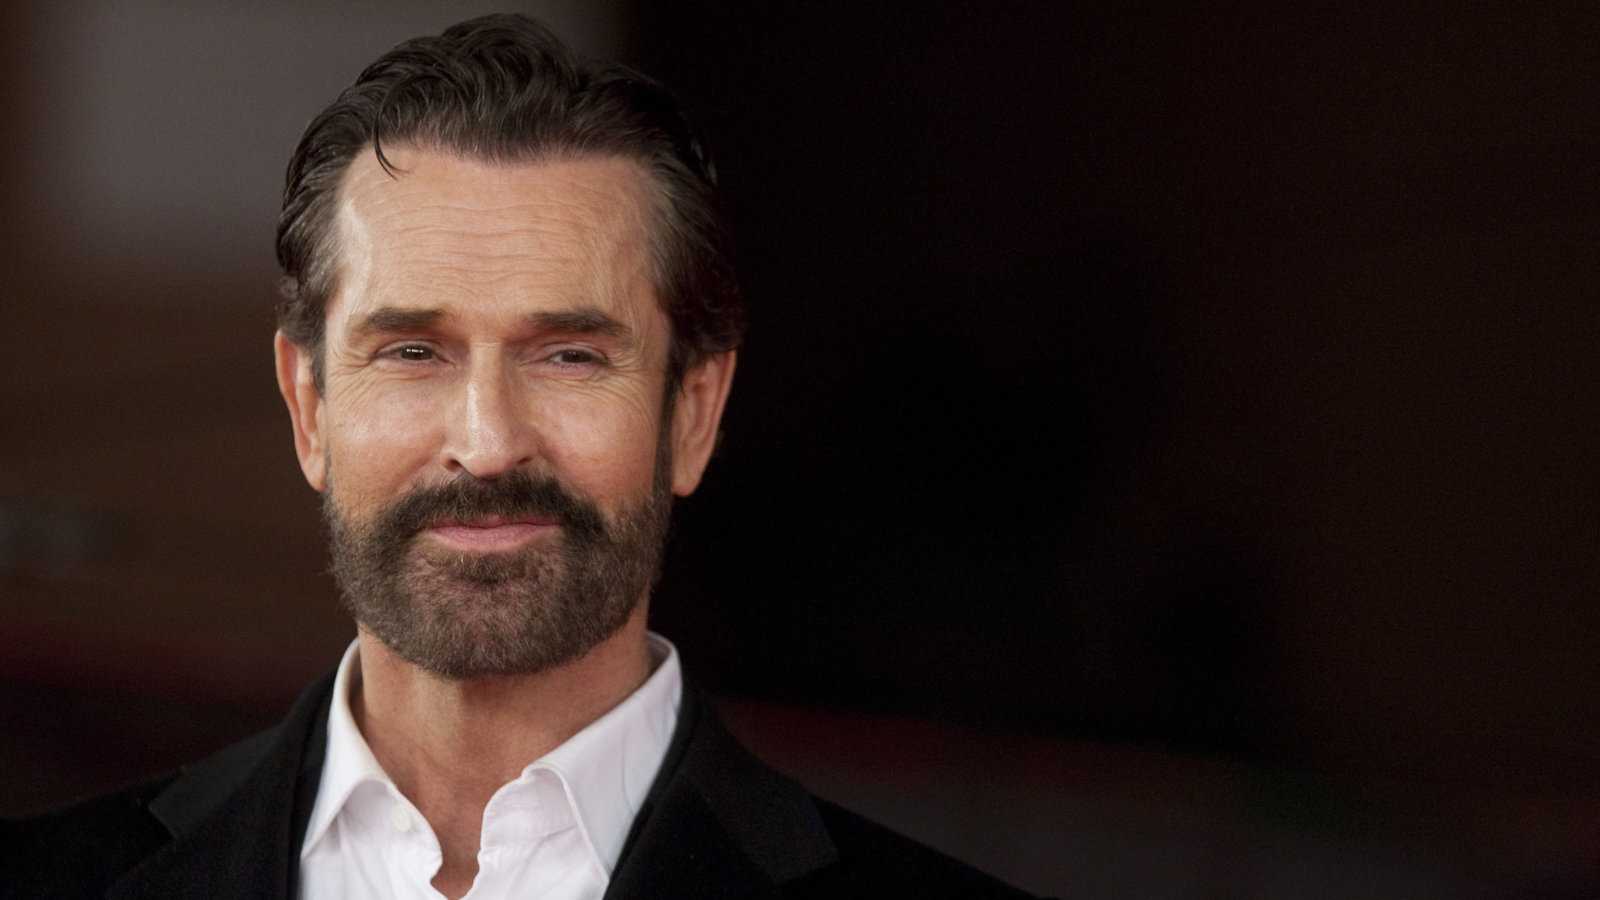 Rupert Everett is a renowned gay actor